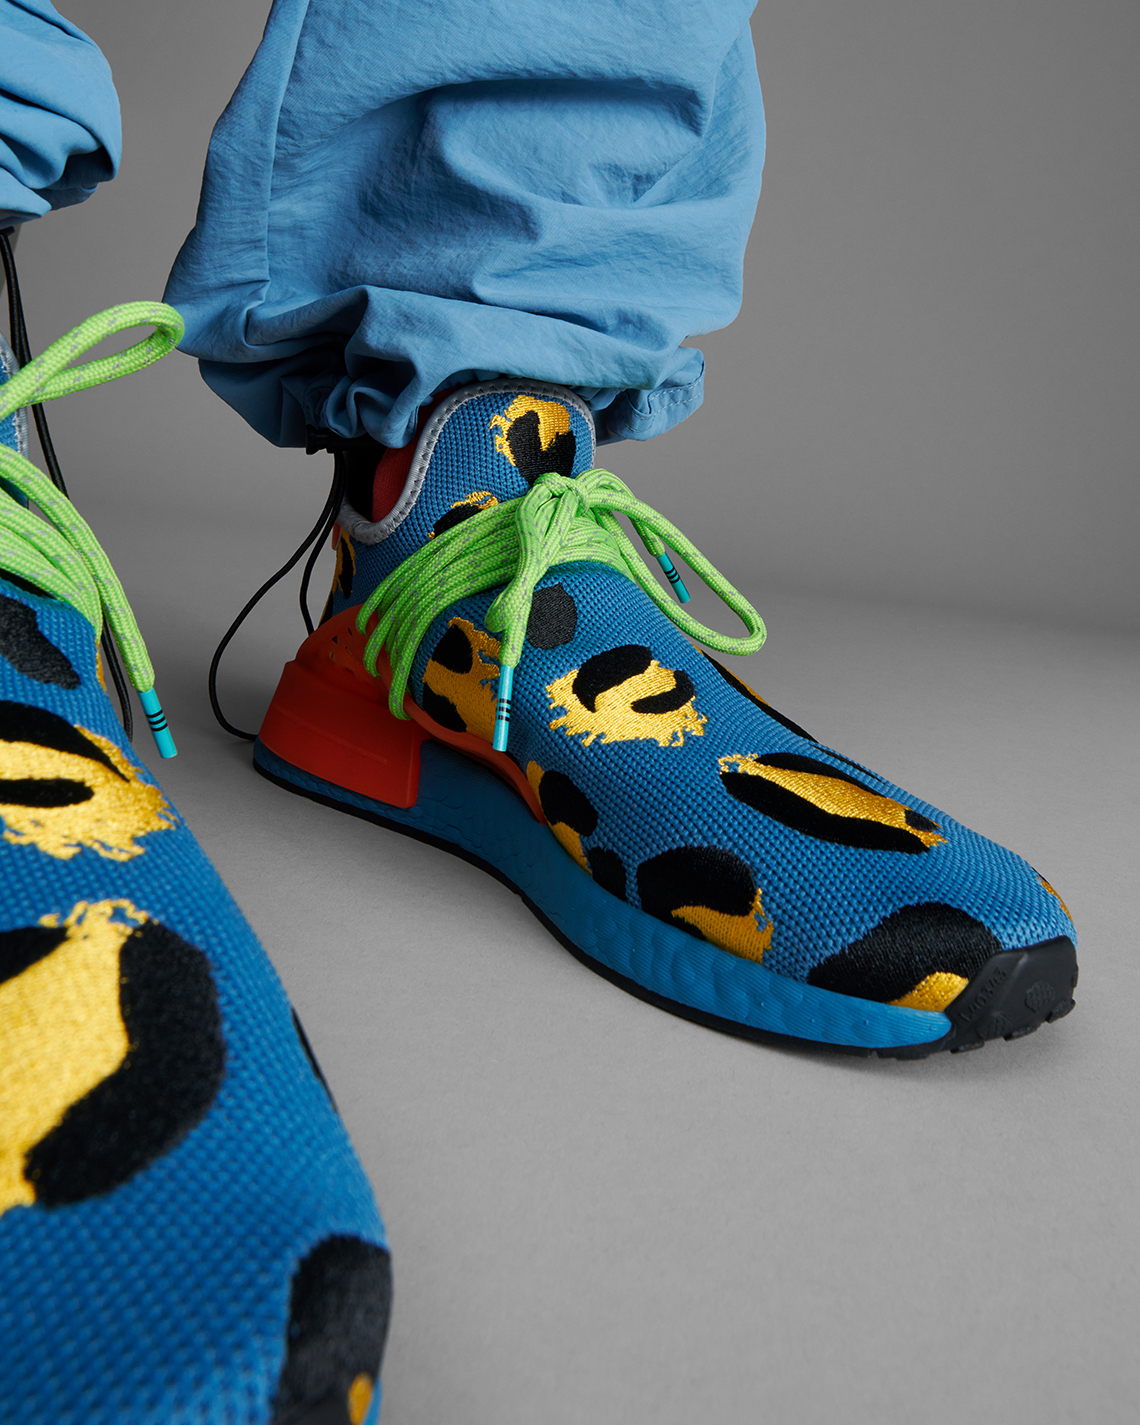 Pharrell Williams And adidas Expand Their HU NMD Animal Print Collection  With A Yellow Colorway - Sneaker News